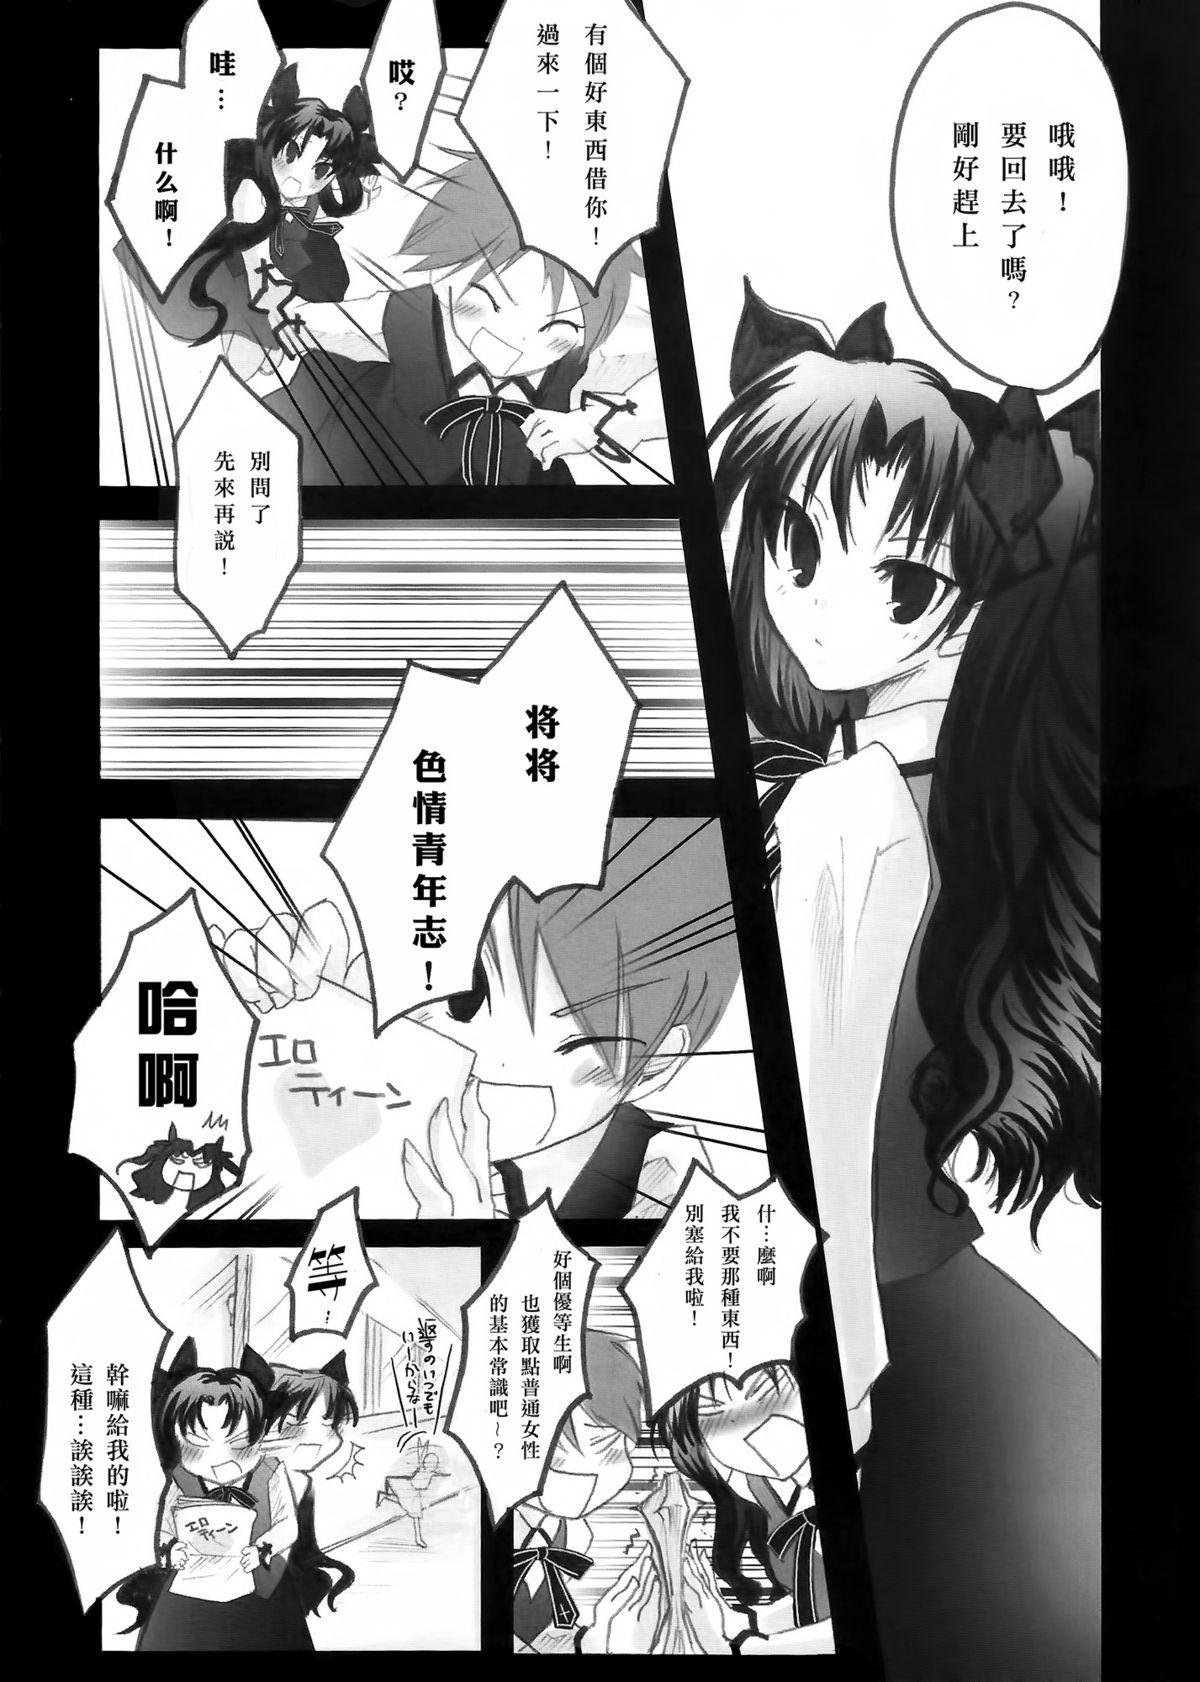 Pissing Himitsu Nikki 1 - Fate stay night Gaypawn - Page 6